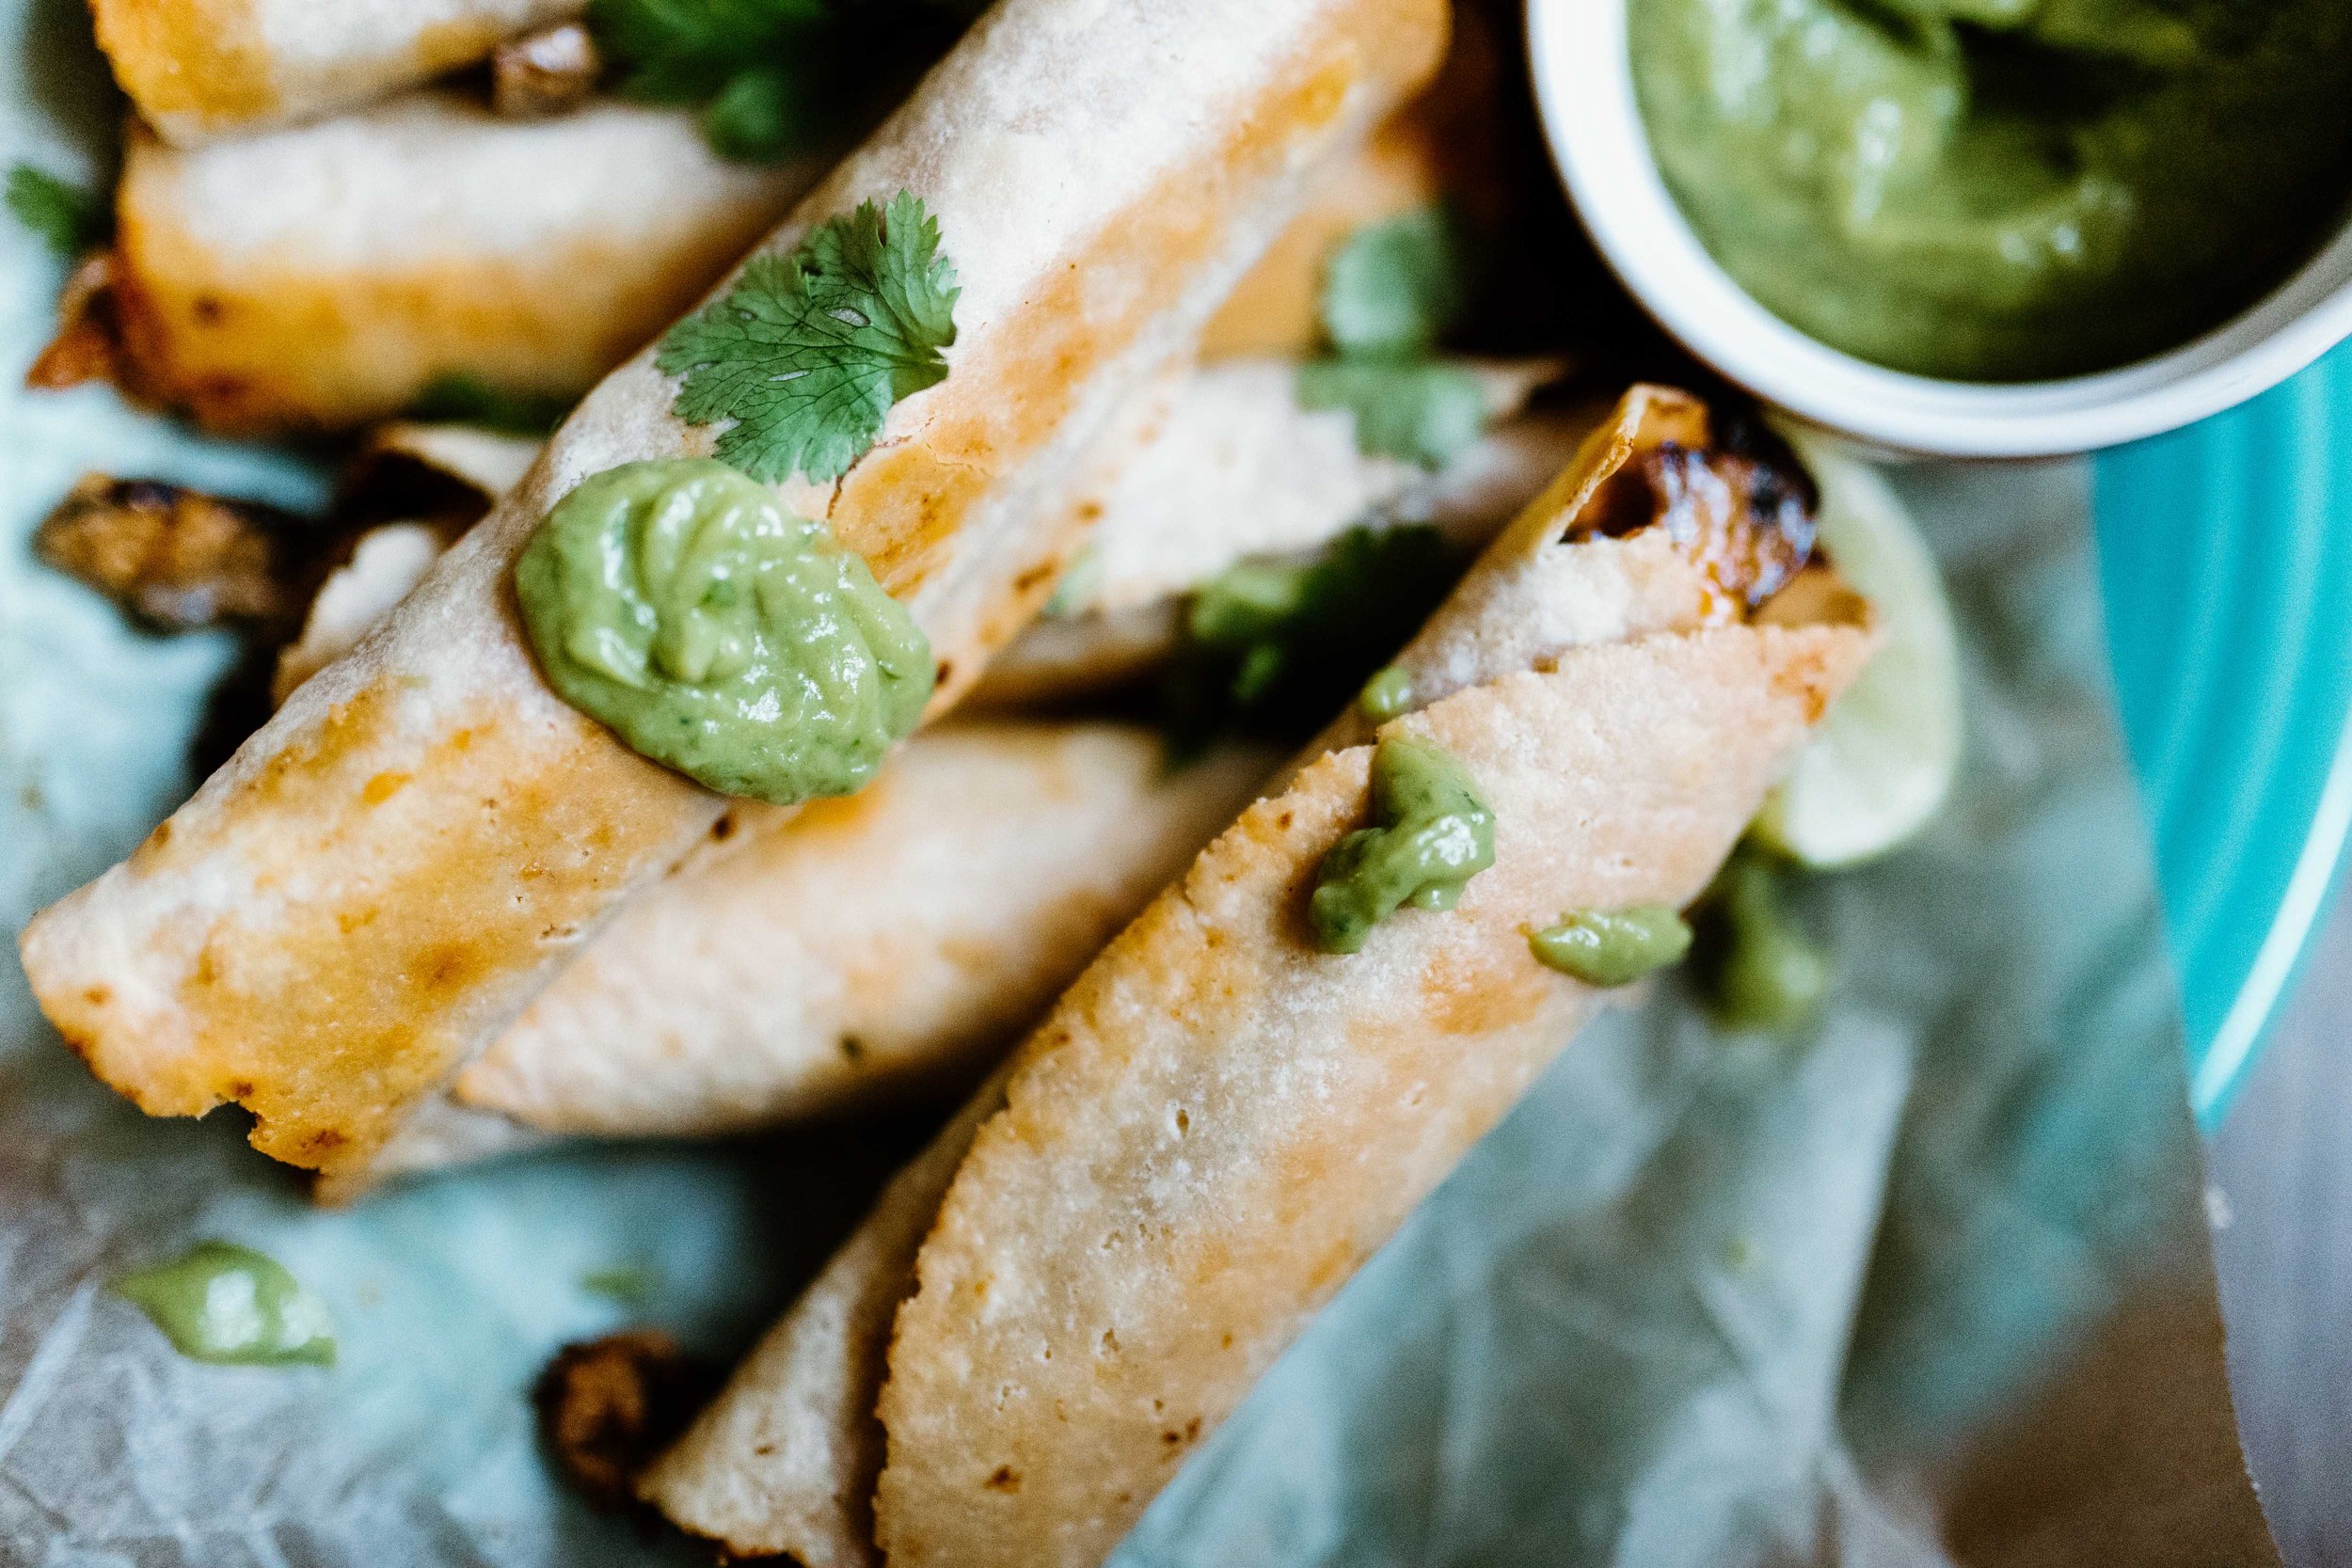 Avocado crema goes perfectly well with ground turkey taquitos